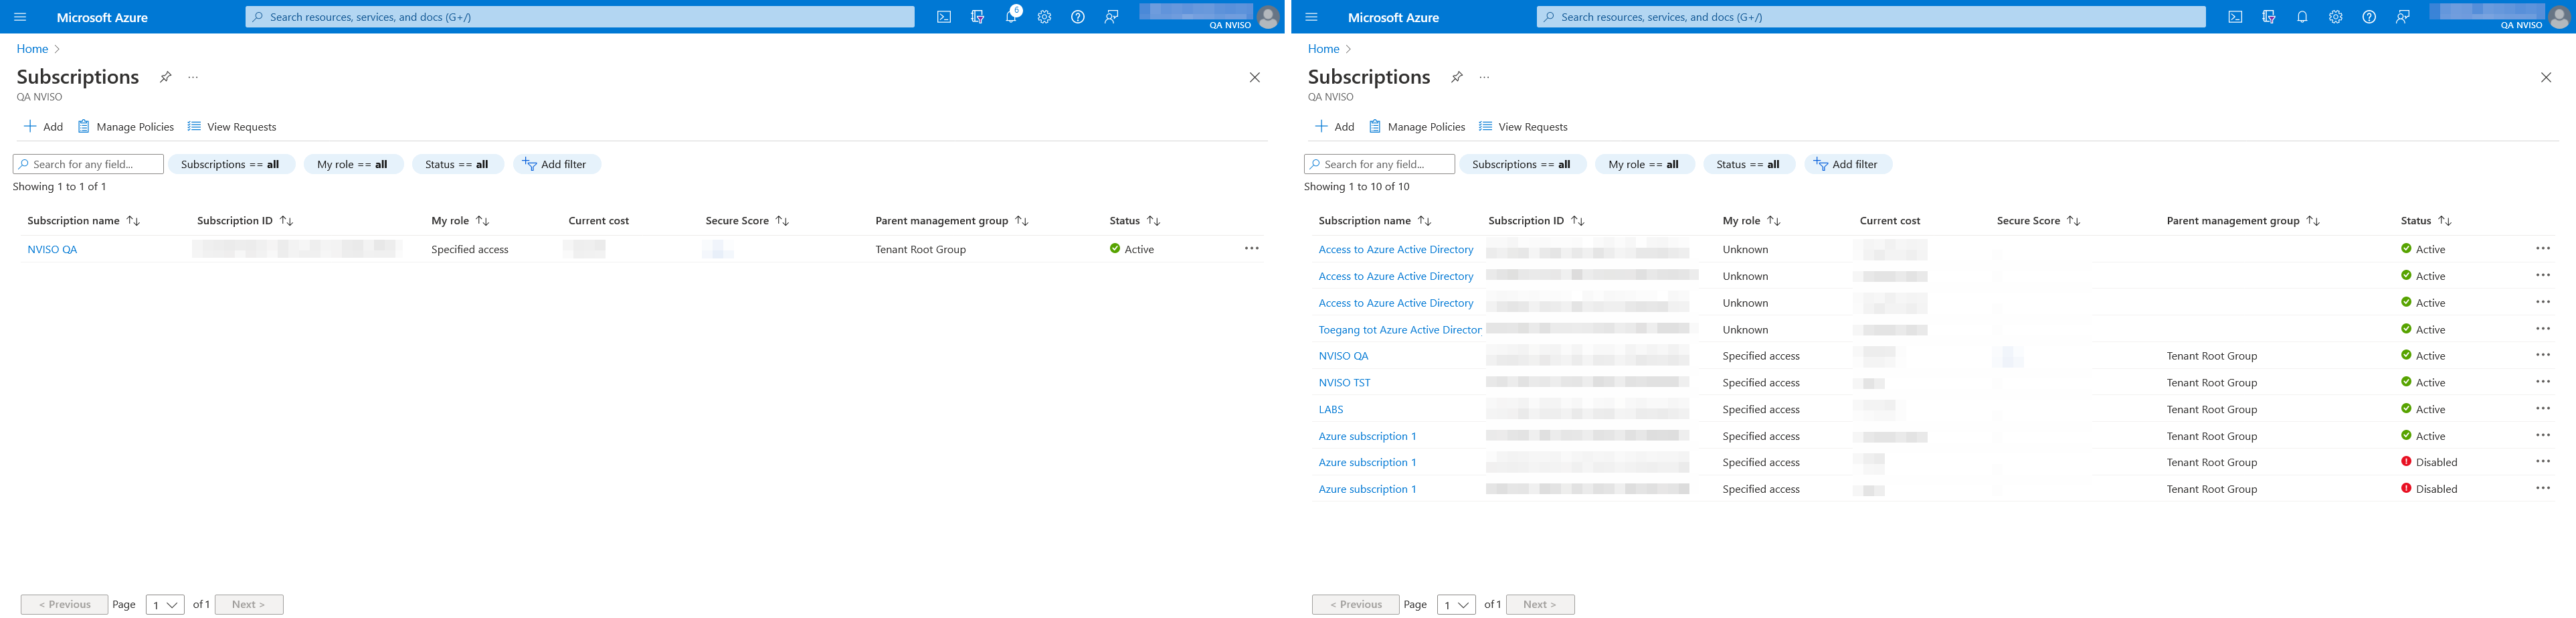 Subscriptions before (left) and after (right) access elevation and filter removal in the Azure portal.